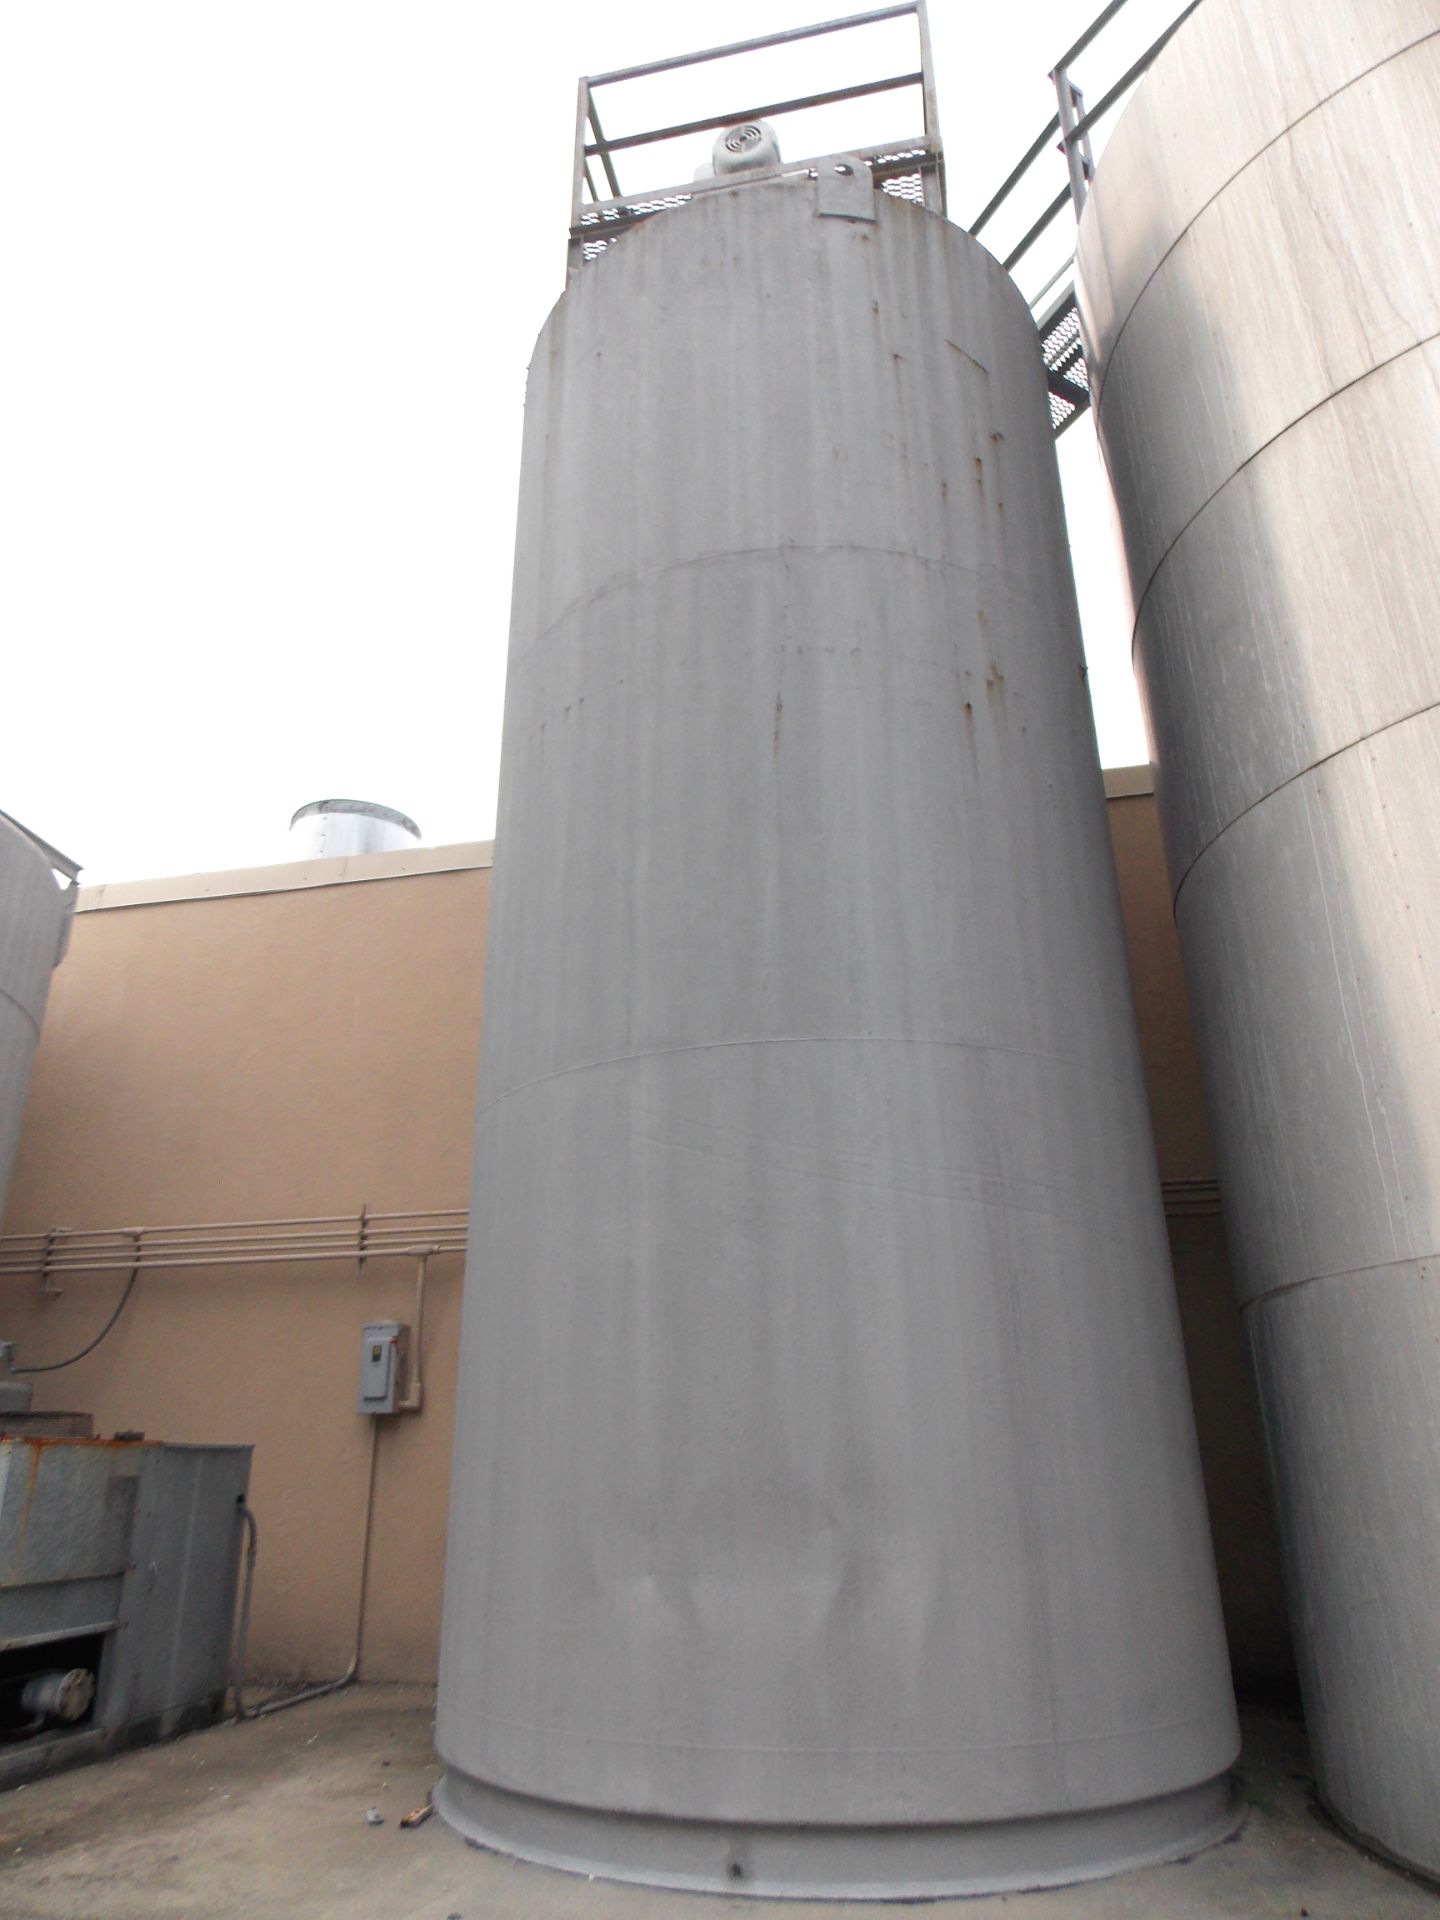 Dairy Craft 6,000 Gallon Vertical Silo with Agitator; Serial: 77J3387 Insulated Only, Top Mounted